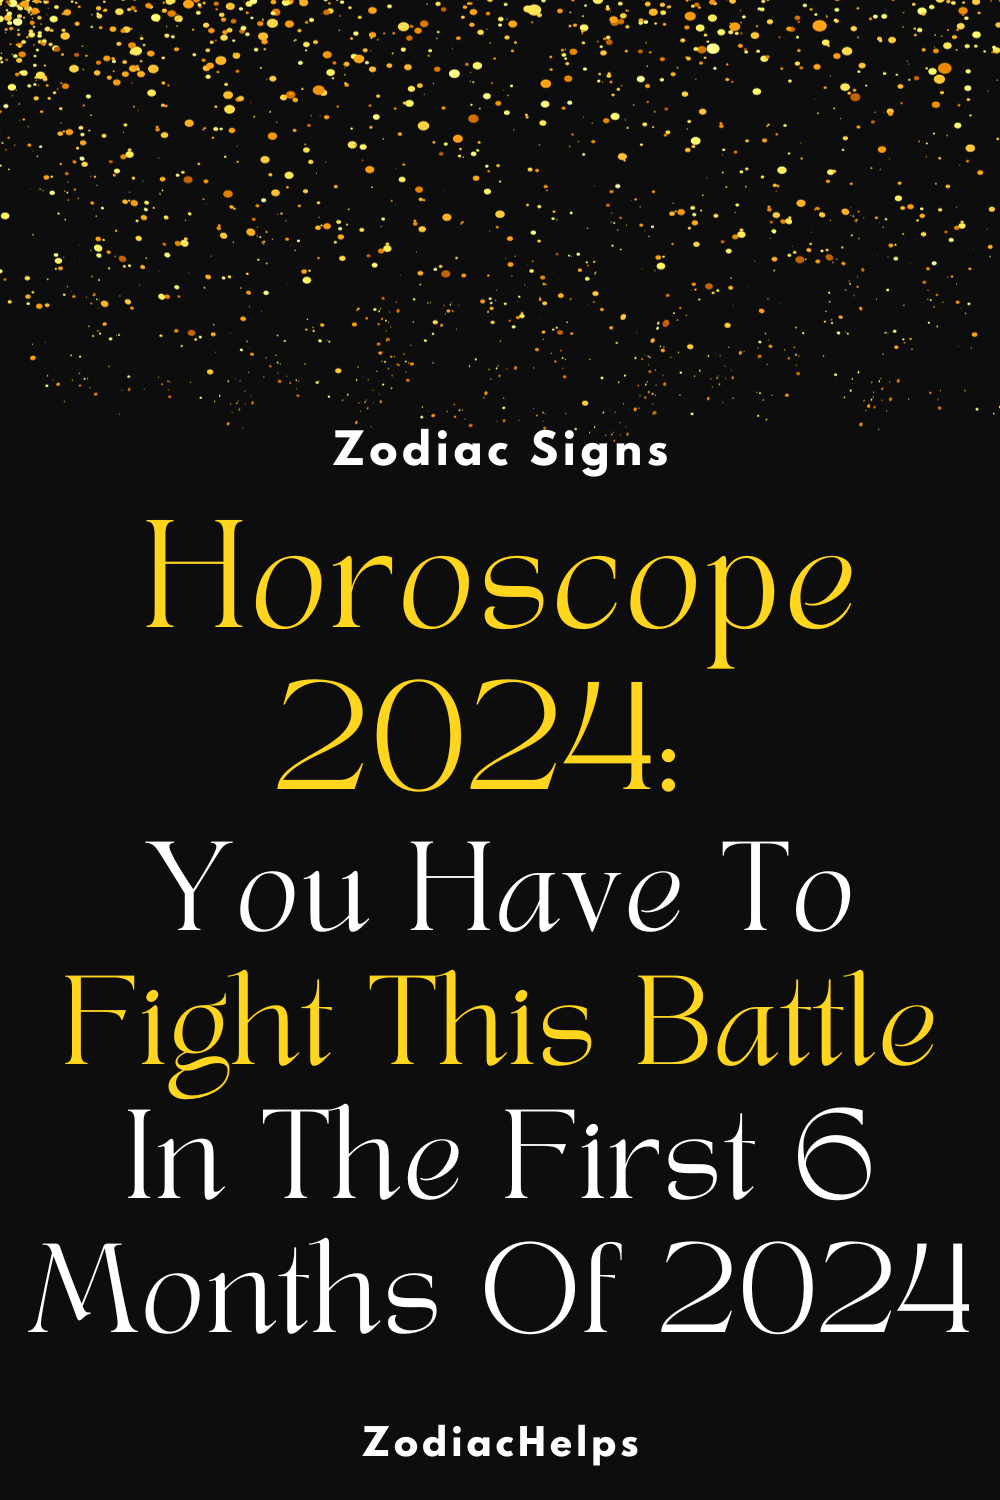 Horoscope 2024: You Have To Fight This Battle In The First 6 Months Of 2024